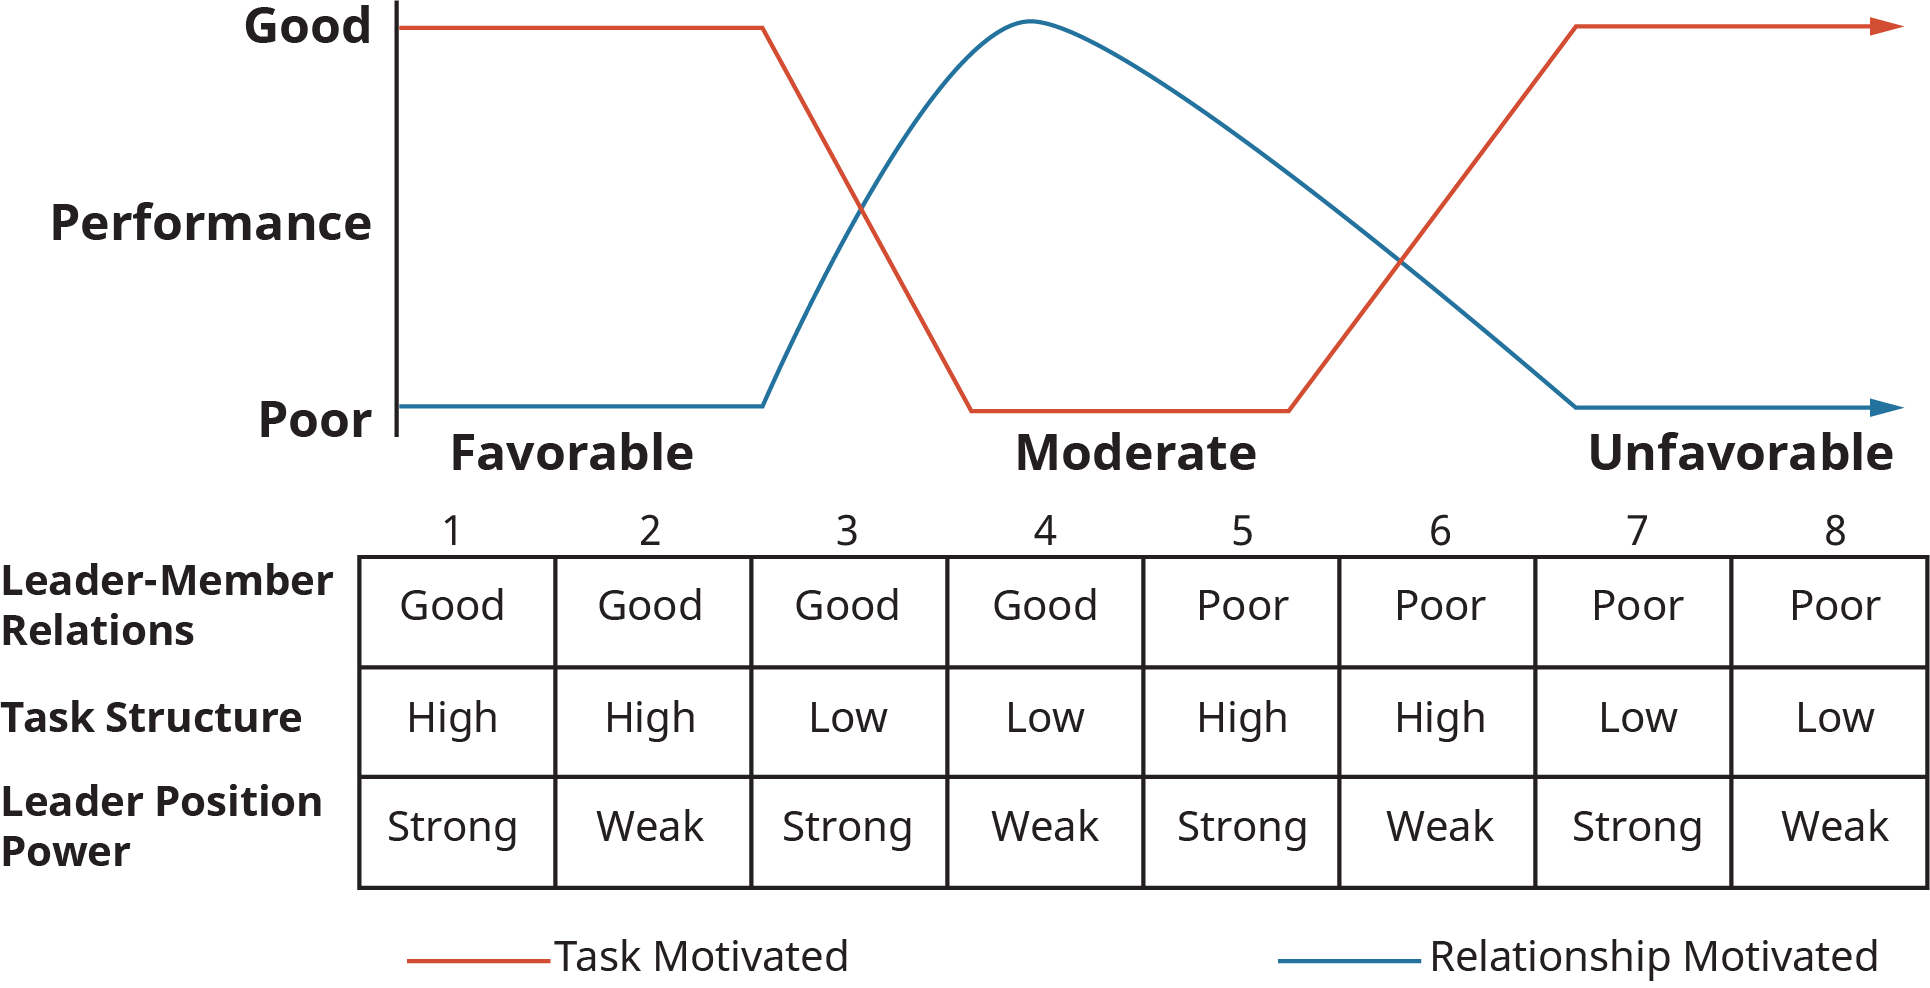 A model showing how task-motivated and relational-motivated leadership vary in terms of performance based on relationships between leaders and followers